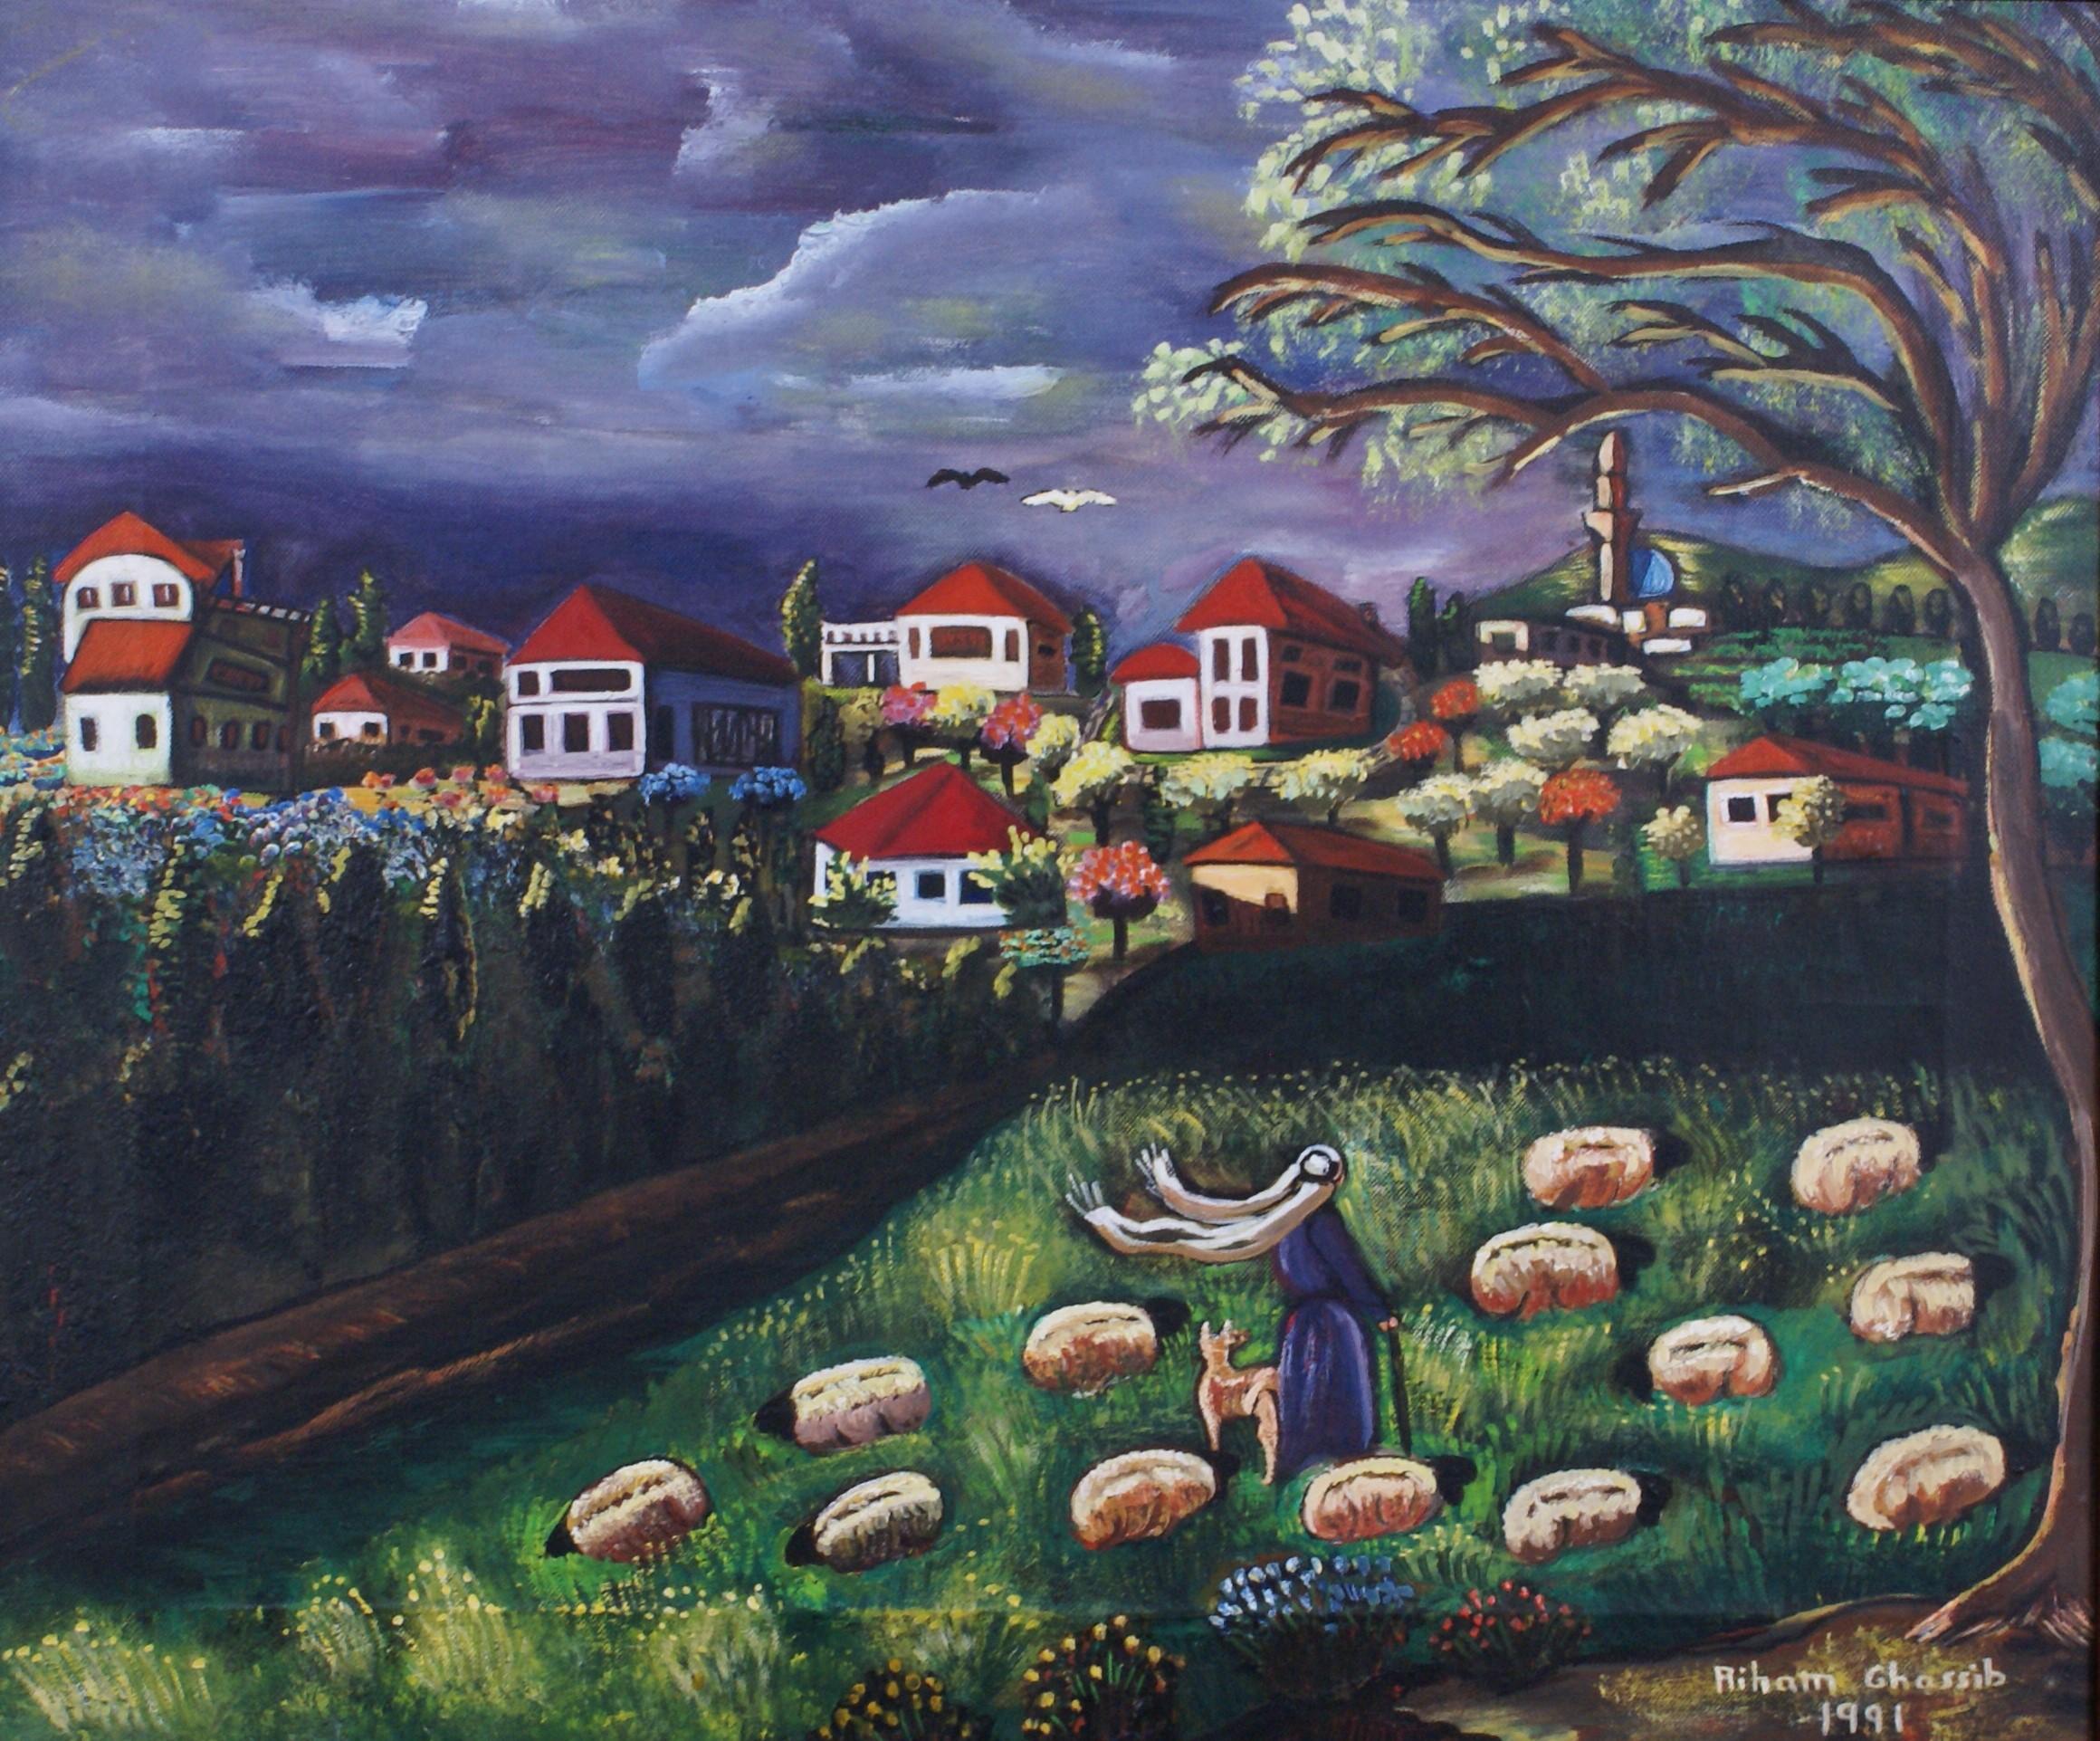 Shepherd and Palaces - Painting by Riham Ghassib